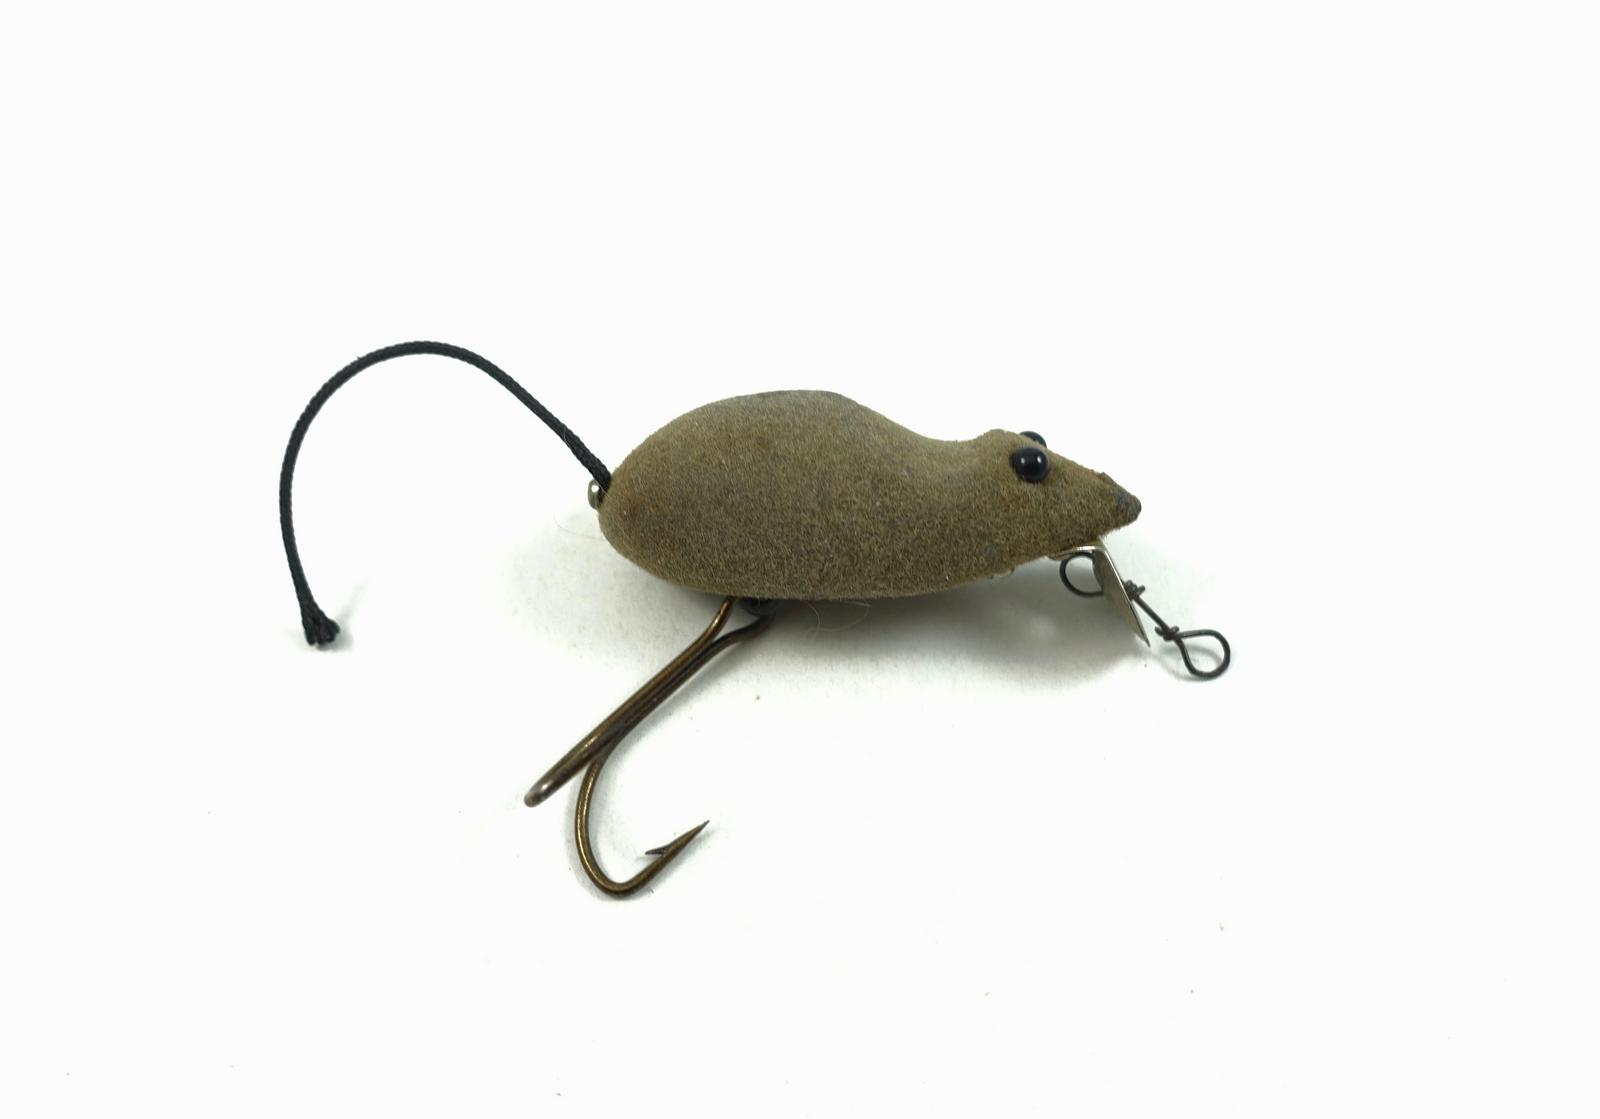 South Bend Trout Fishing Baits, Lures for sale